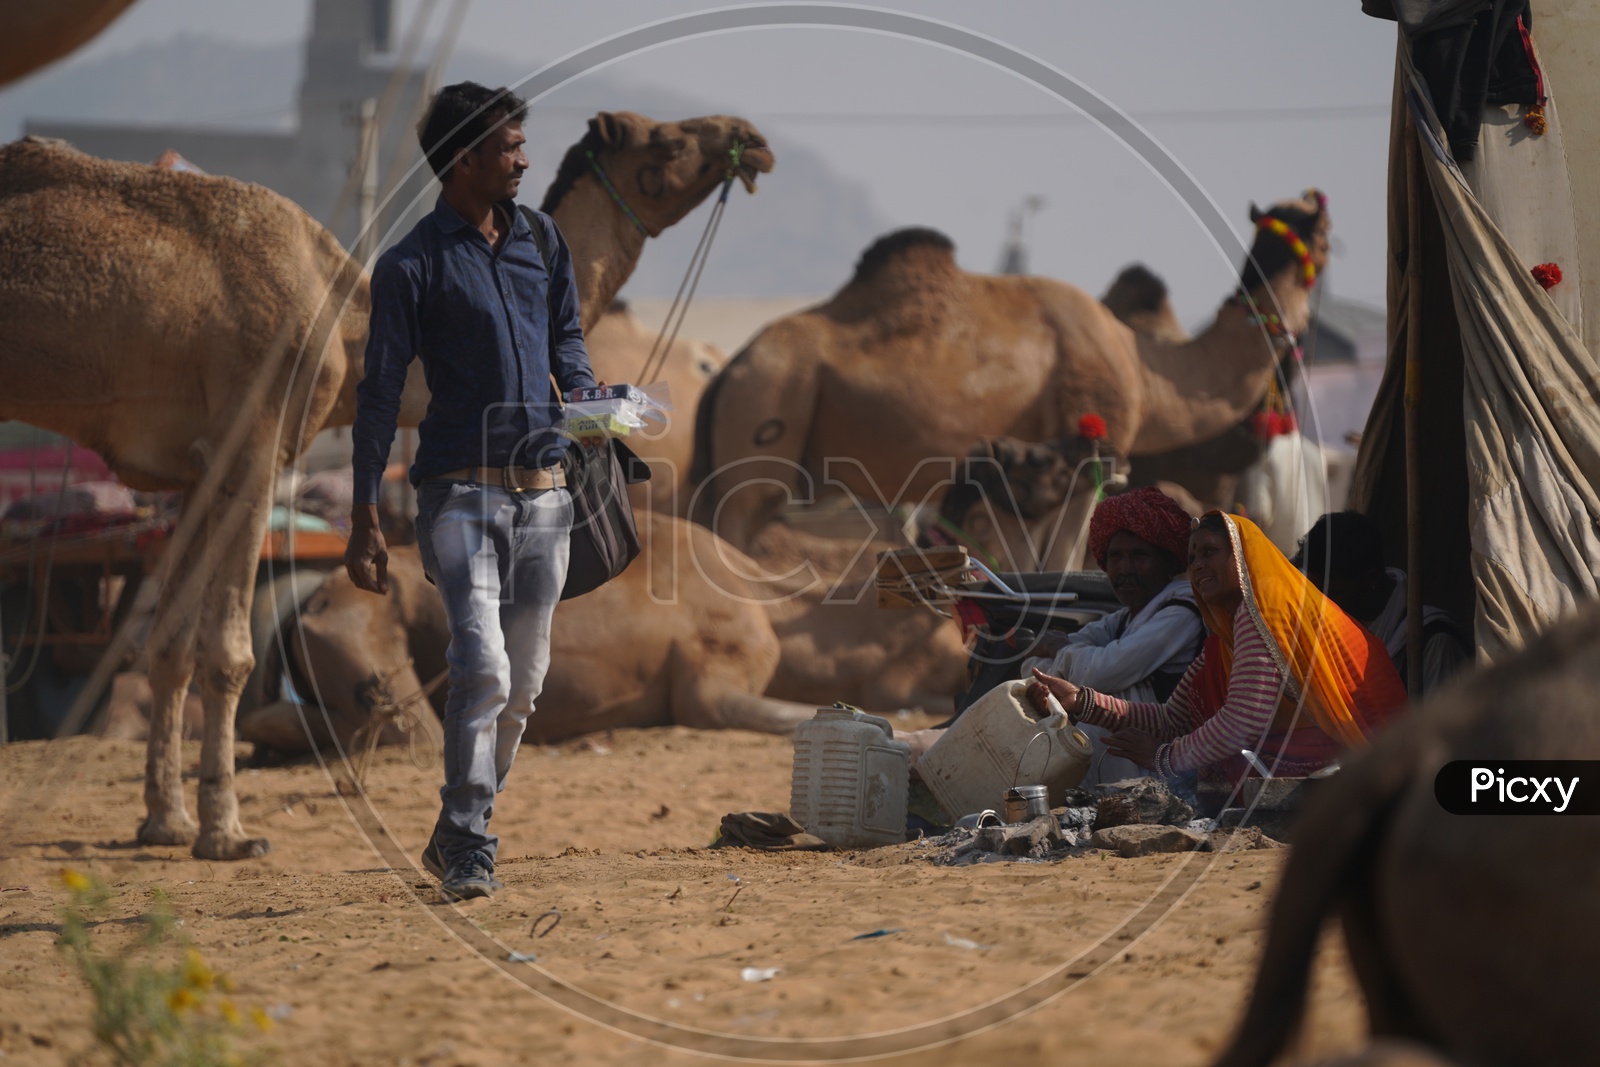 A Local Vendor Selling Electronic Goods Spotted In Pushkar Camel Fair